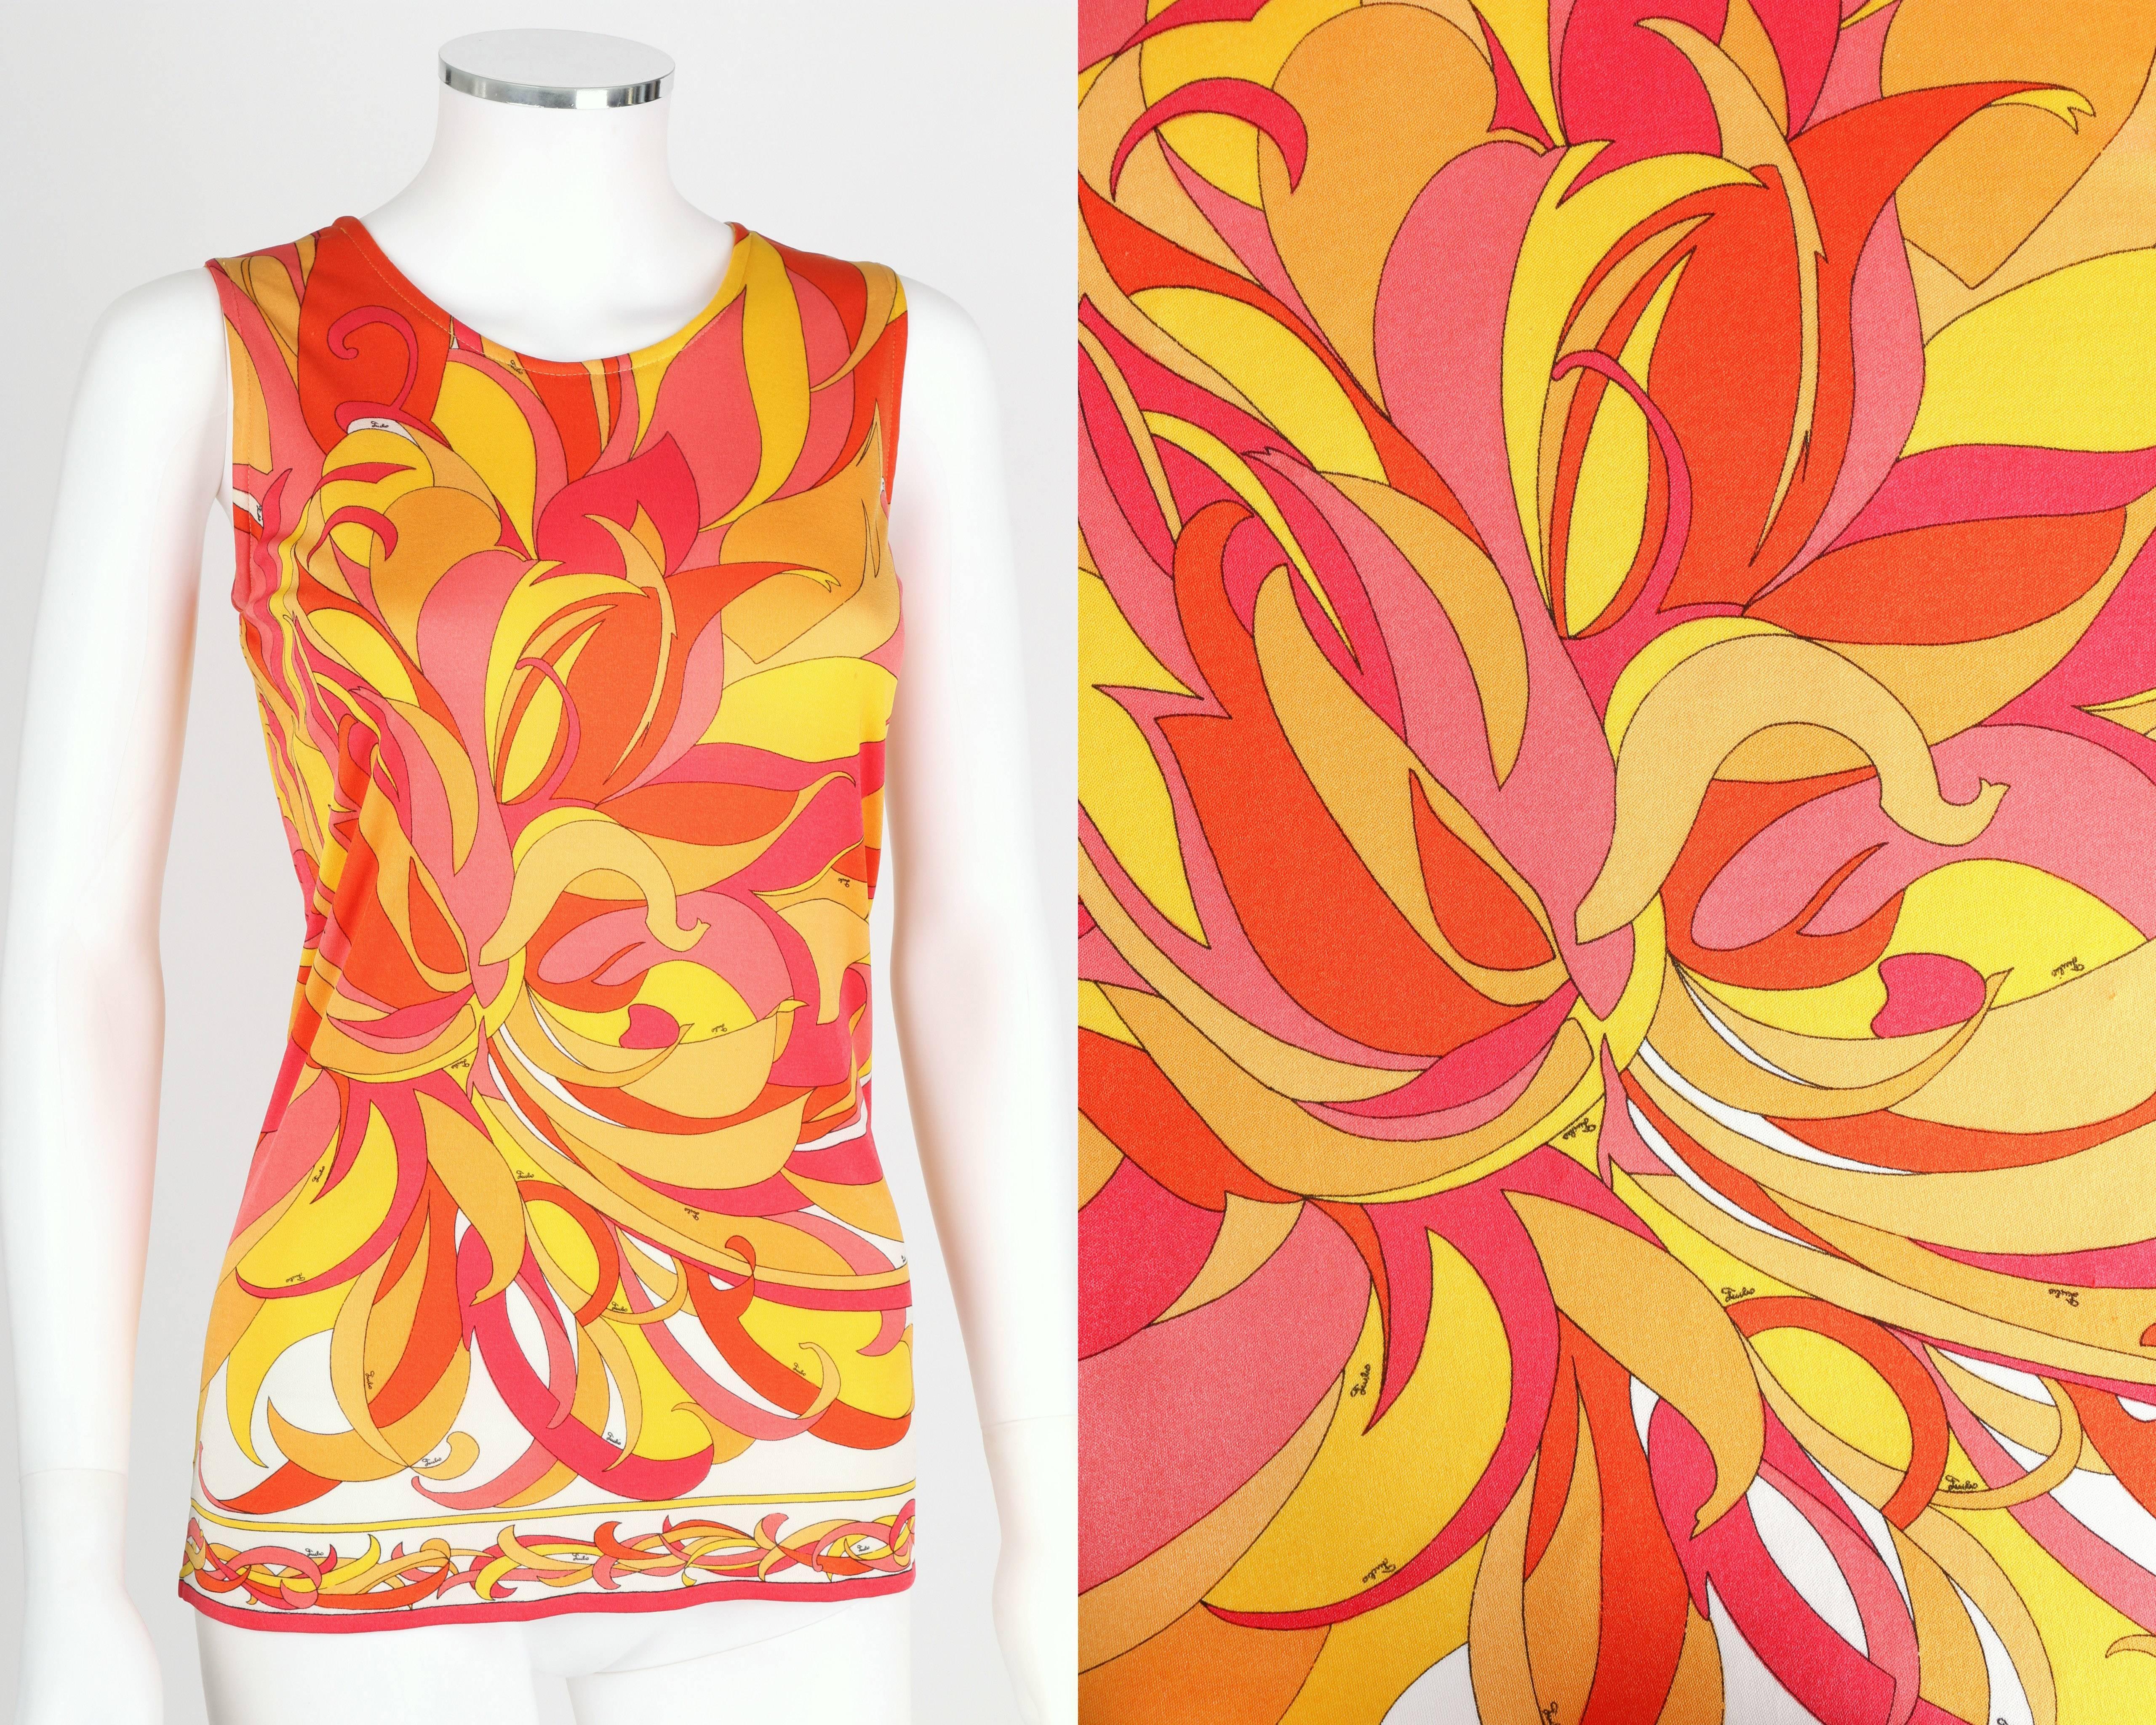 Vintage c.1970s Emilio Pucci orange, red, pink, yellow and white multicolor silk blend jersey top. Abstract chrysanthemum motif signature print. Sleeveless. Round neckline. Slip-on style. Please note that this item was pinned to better fit our